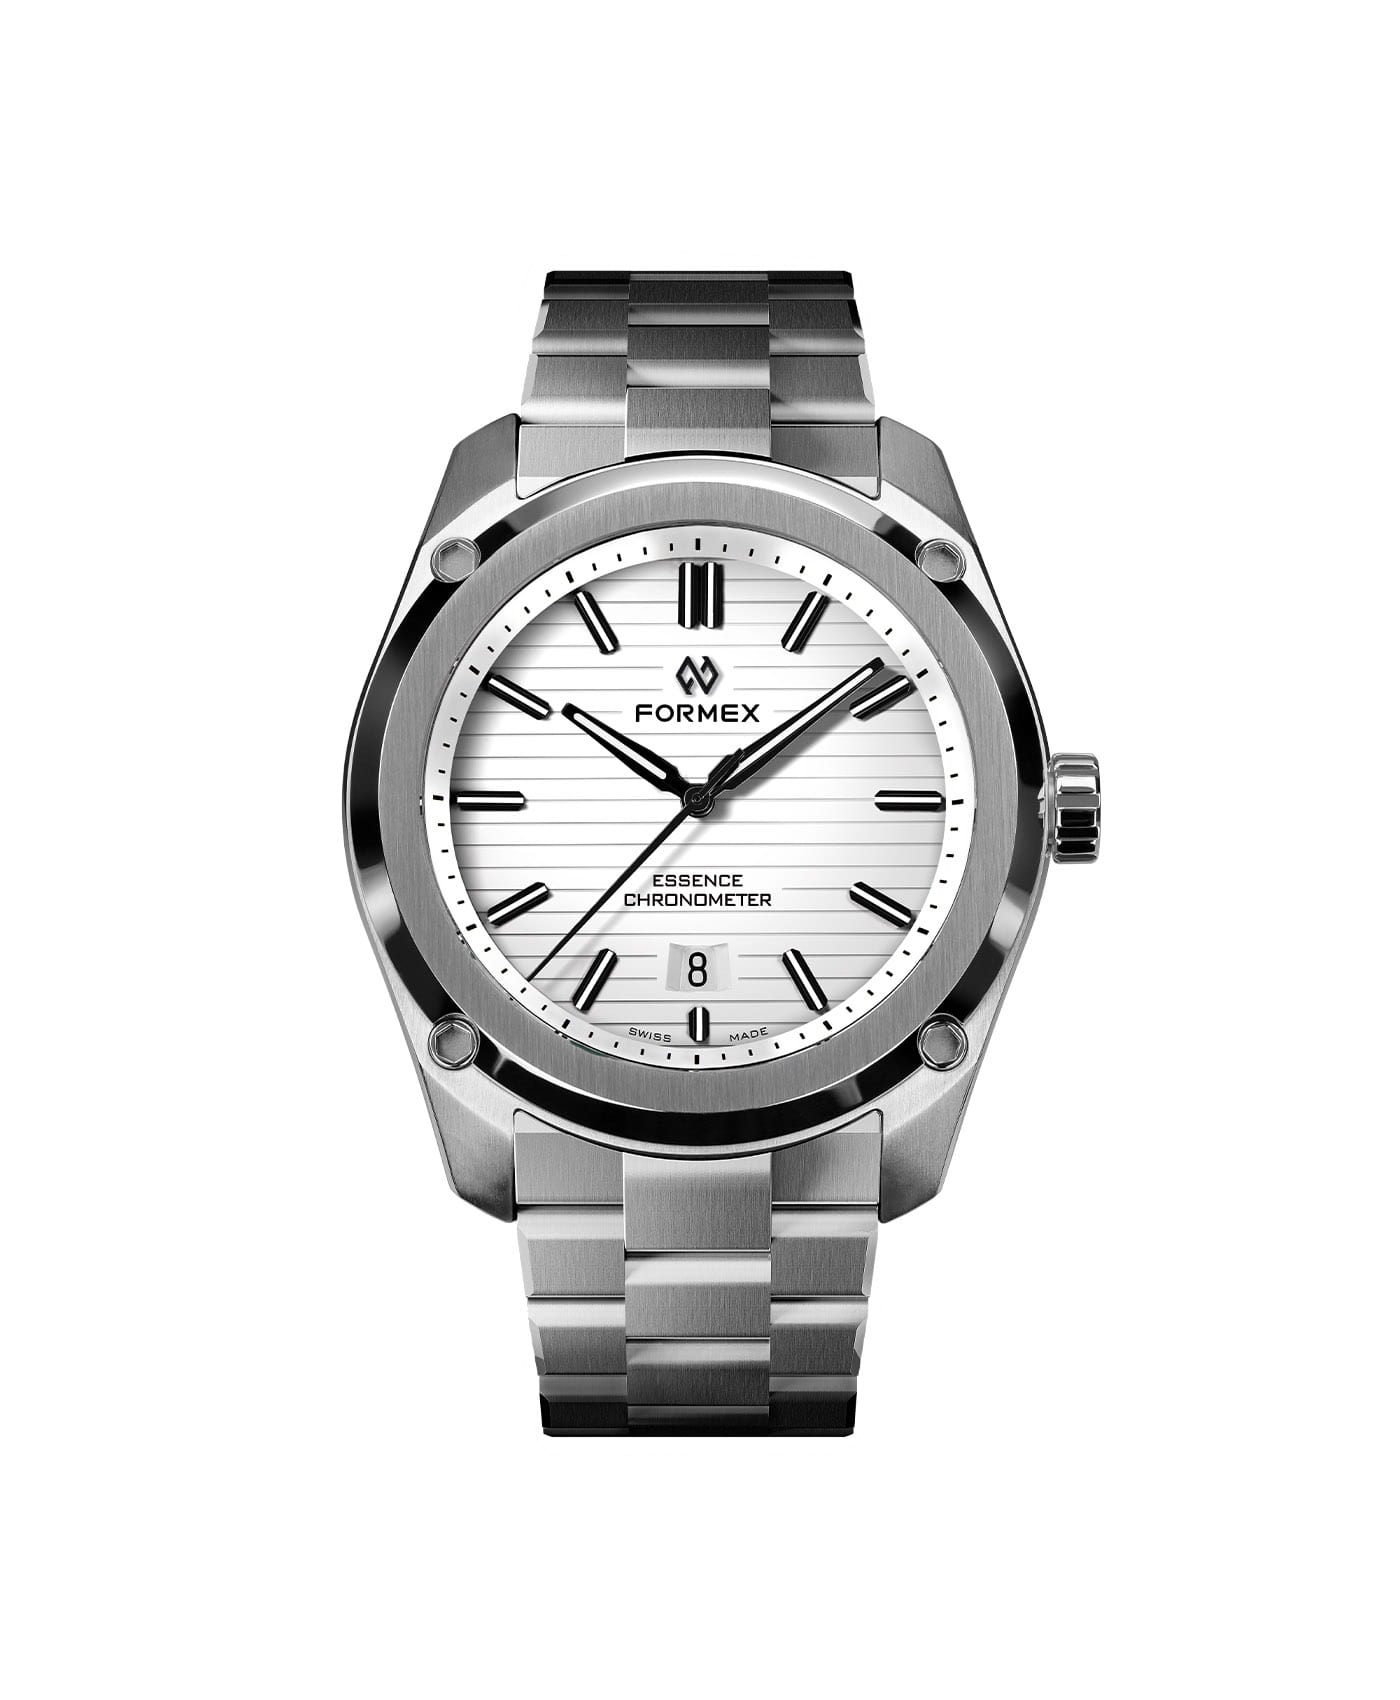 Formex - Essence FortyThree - Automatic Chronometer White dial